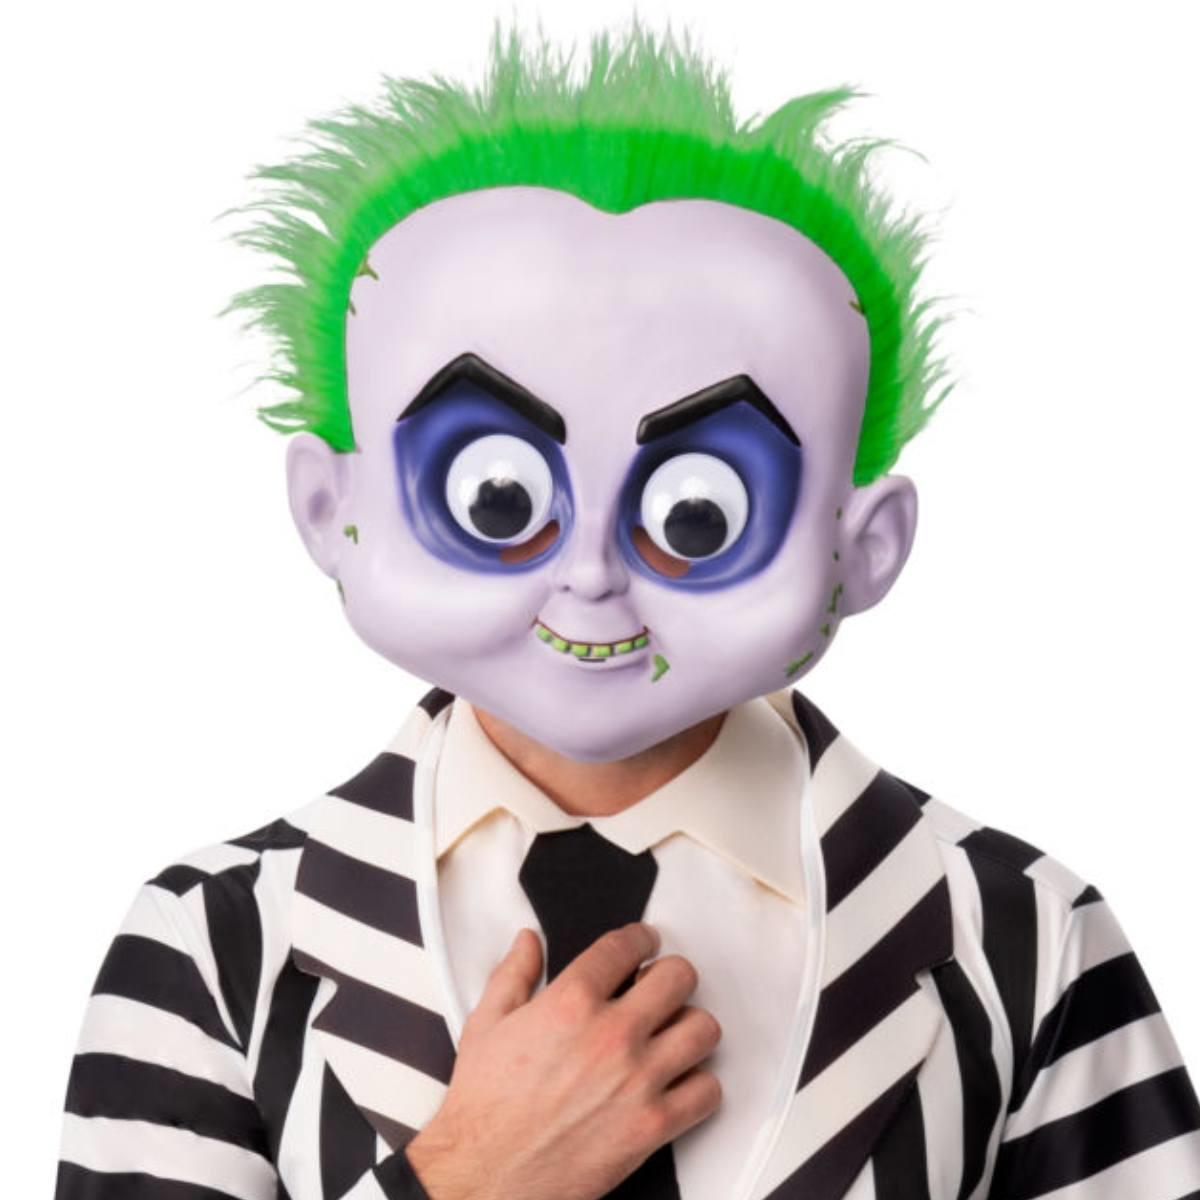 Beetlejuice Googly Eyed Face Mask by Rubies 202595 Fully Licenced and available here at Karnival Costumes online party shop